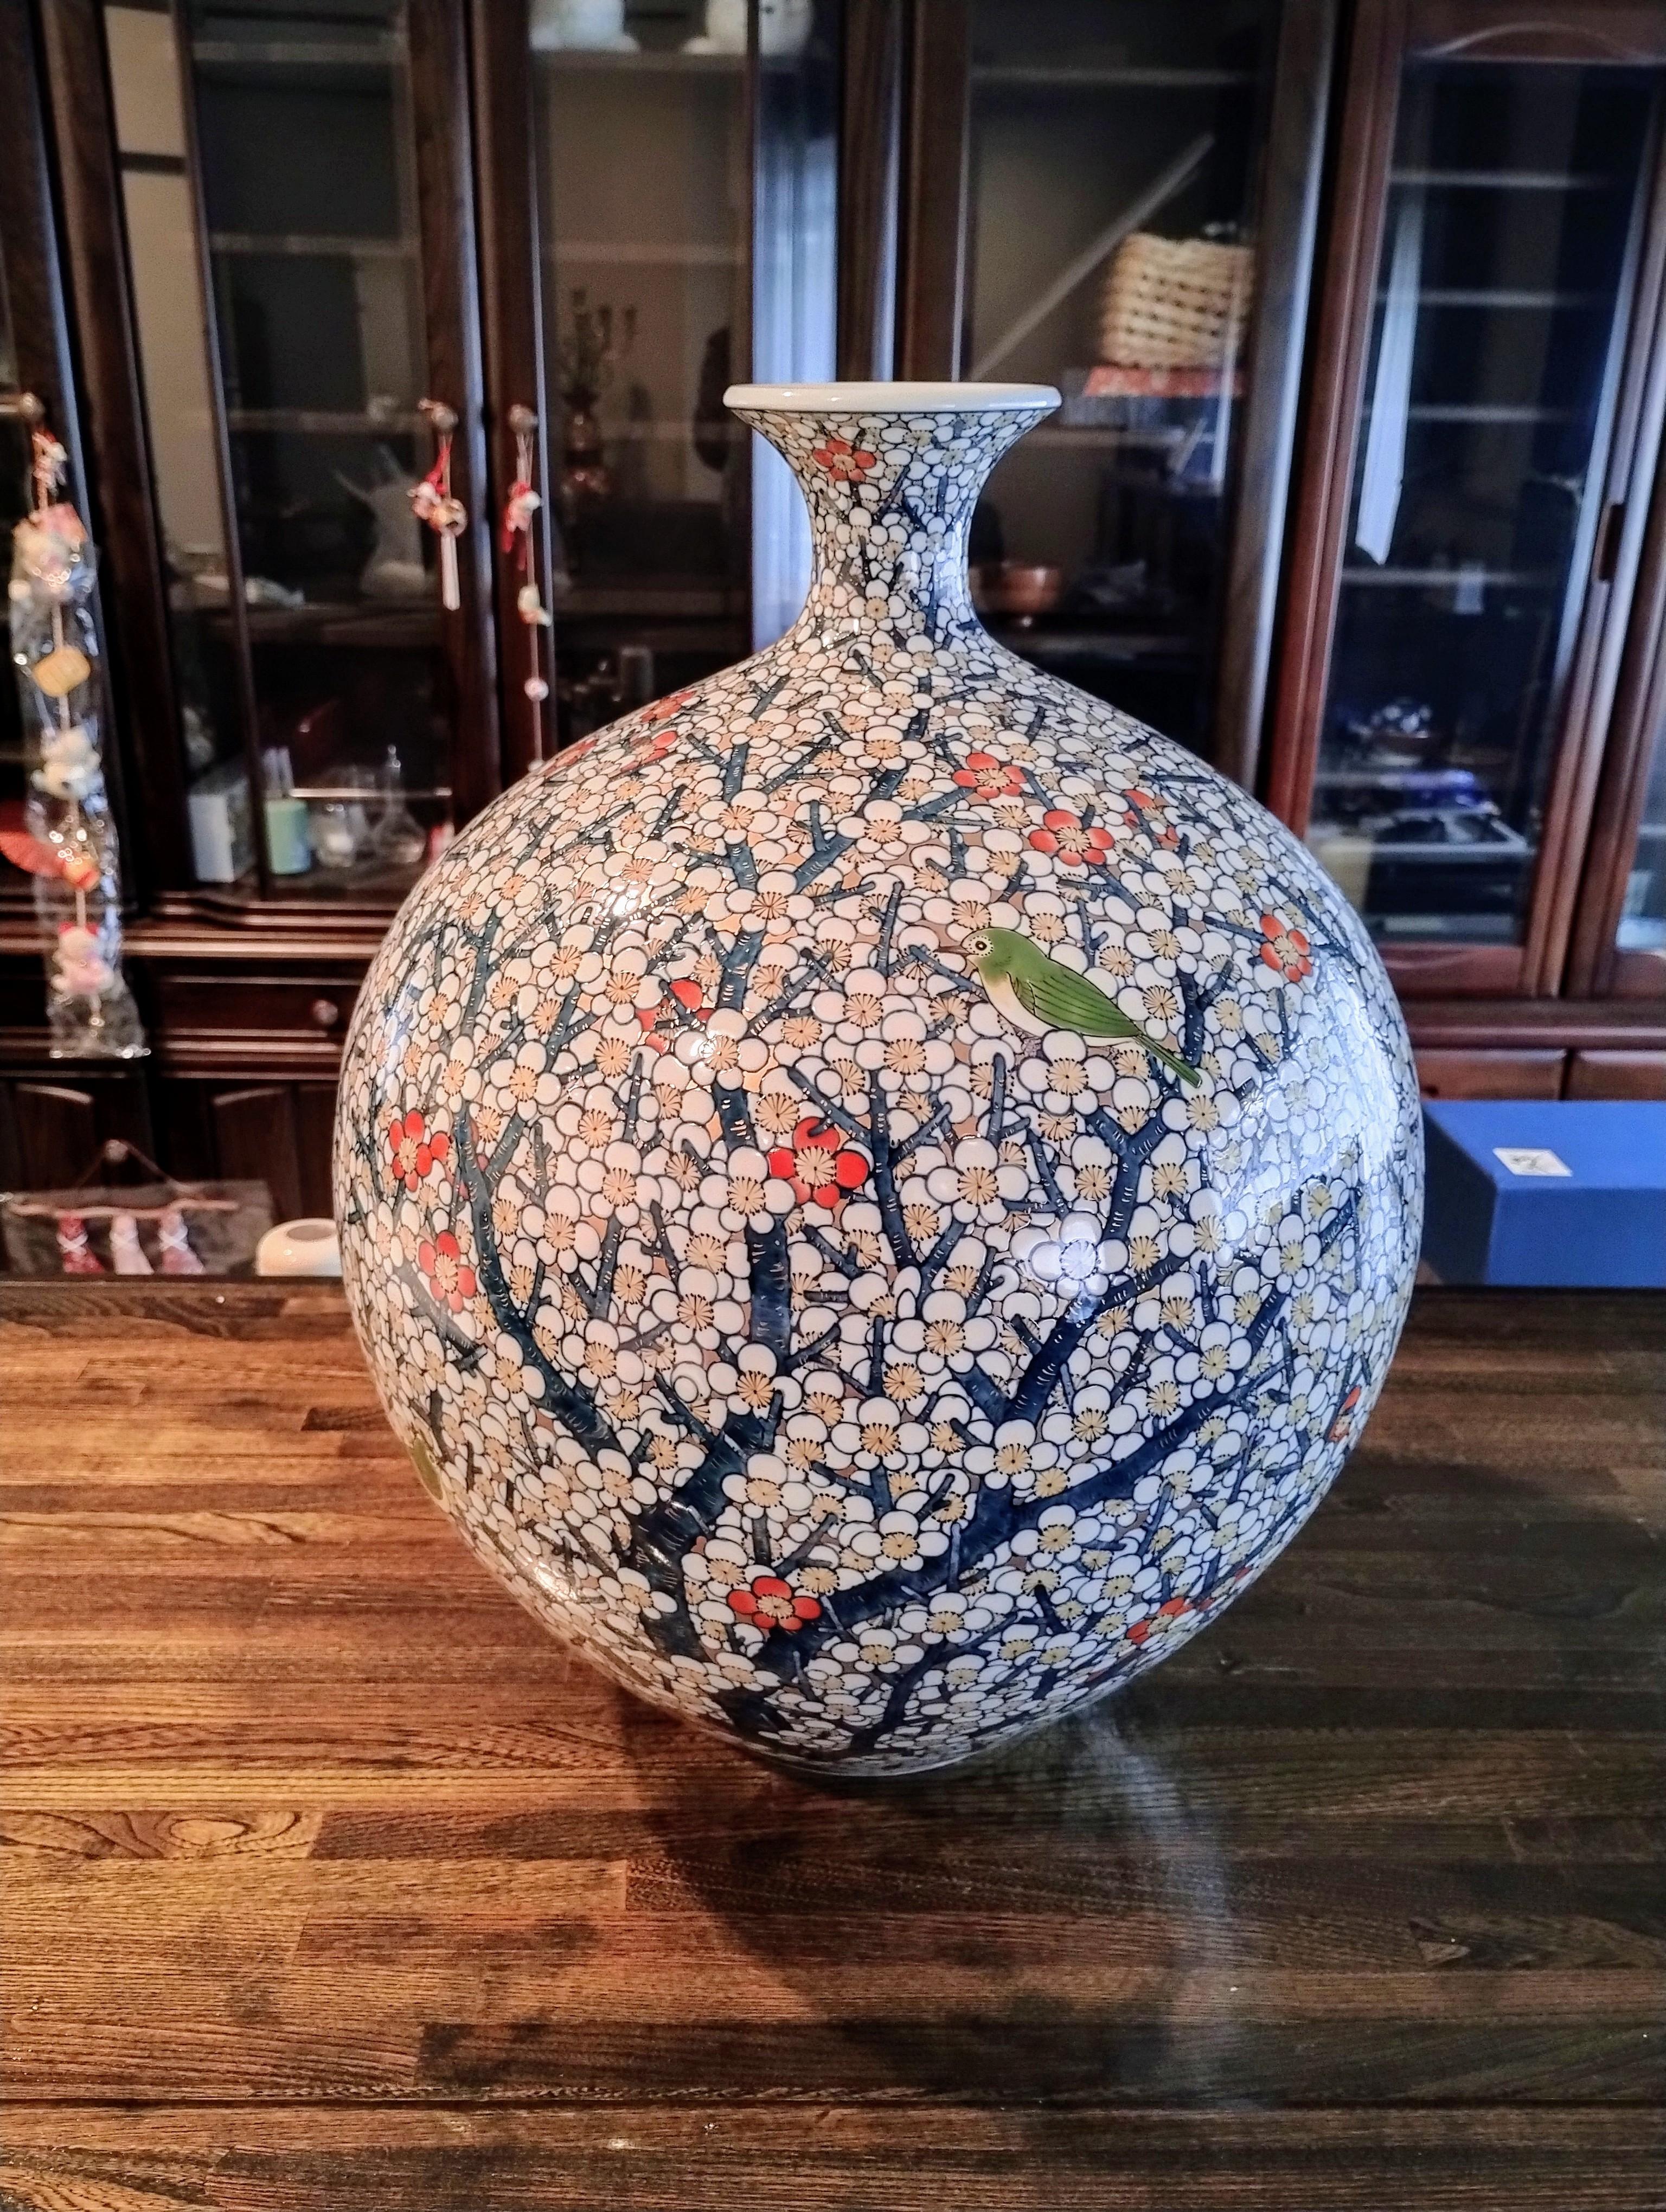 Extraordinary very large Japanese contemporary decorative porcelain vase, extremely intricately hand-painted in deep blue, white and gold on a stunning baluster shape body, a signed masterpiece by highly acclaimed award-winning master porcelain